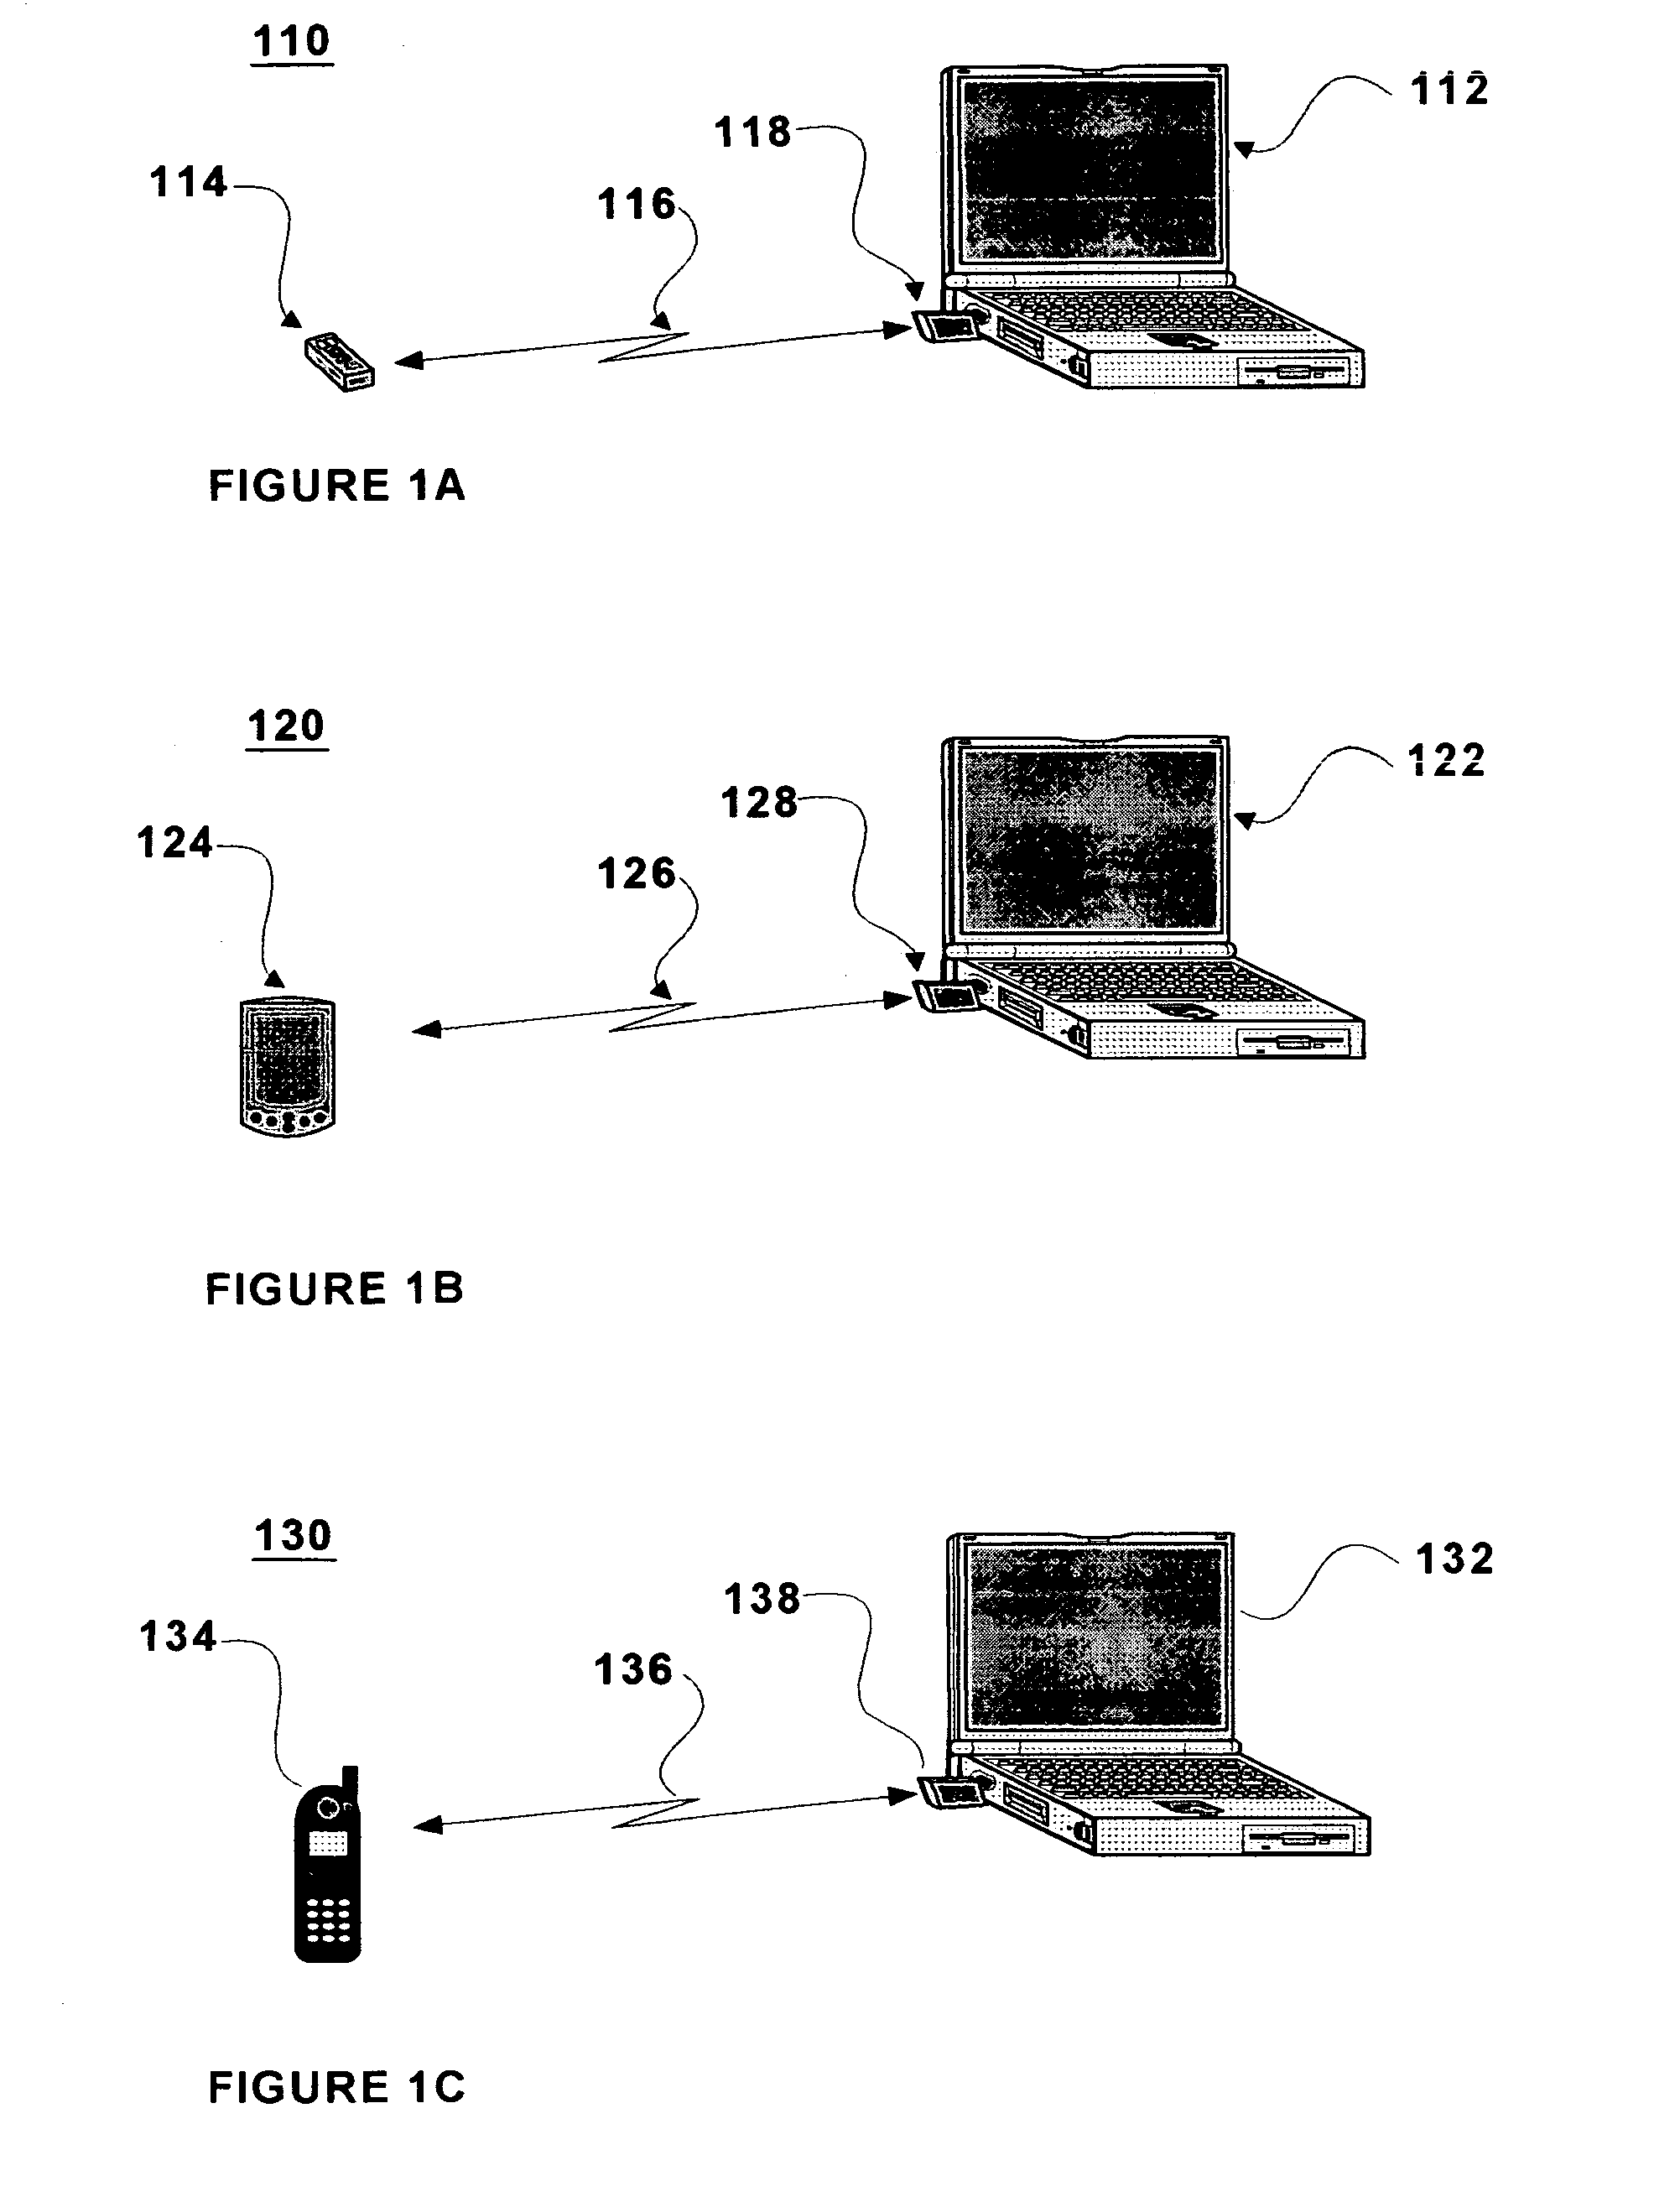 Wireless access management and control for personal computing devices